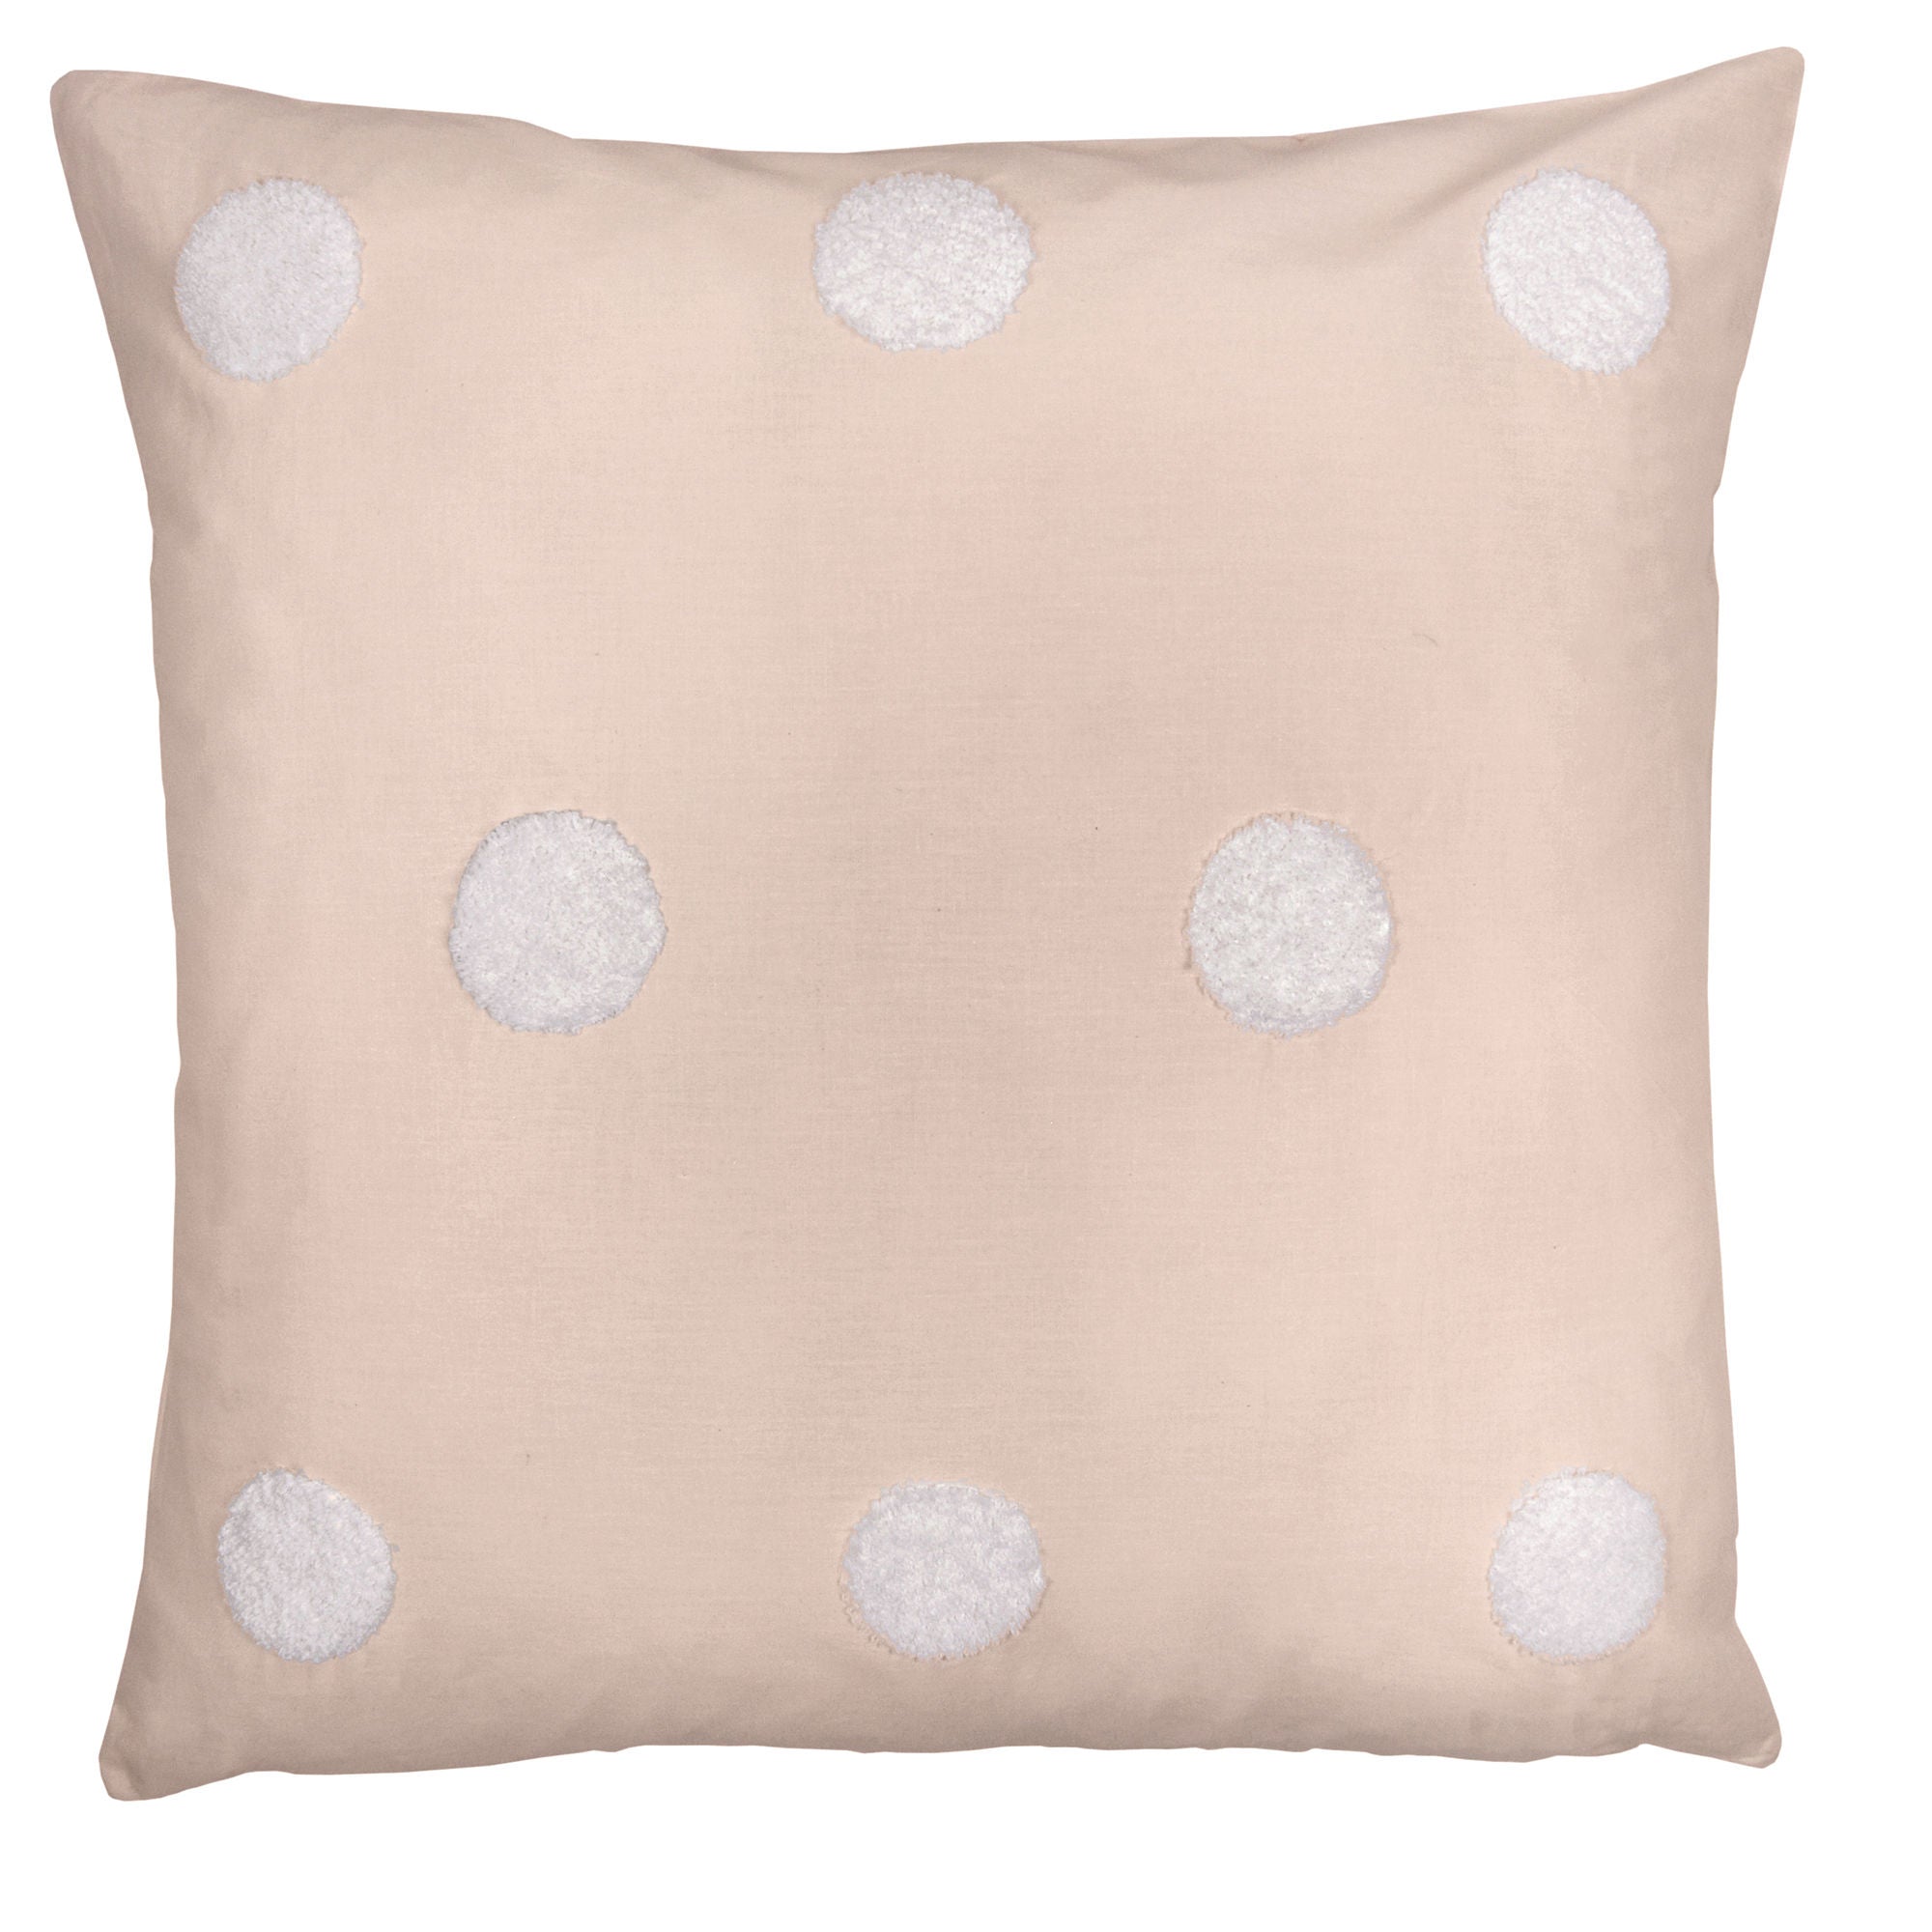 Dot Garden Cushion by Appletree Boutique in Pink with White Dots 43 x 43cm - Cushion - Appletree Boutique